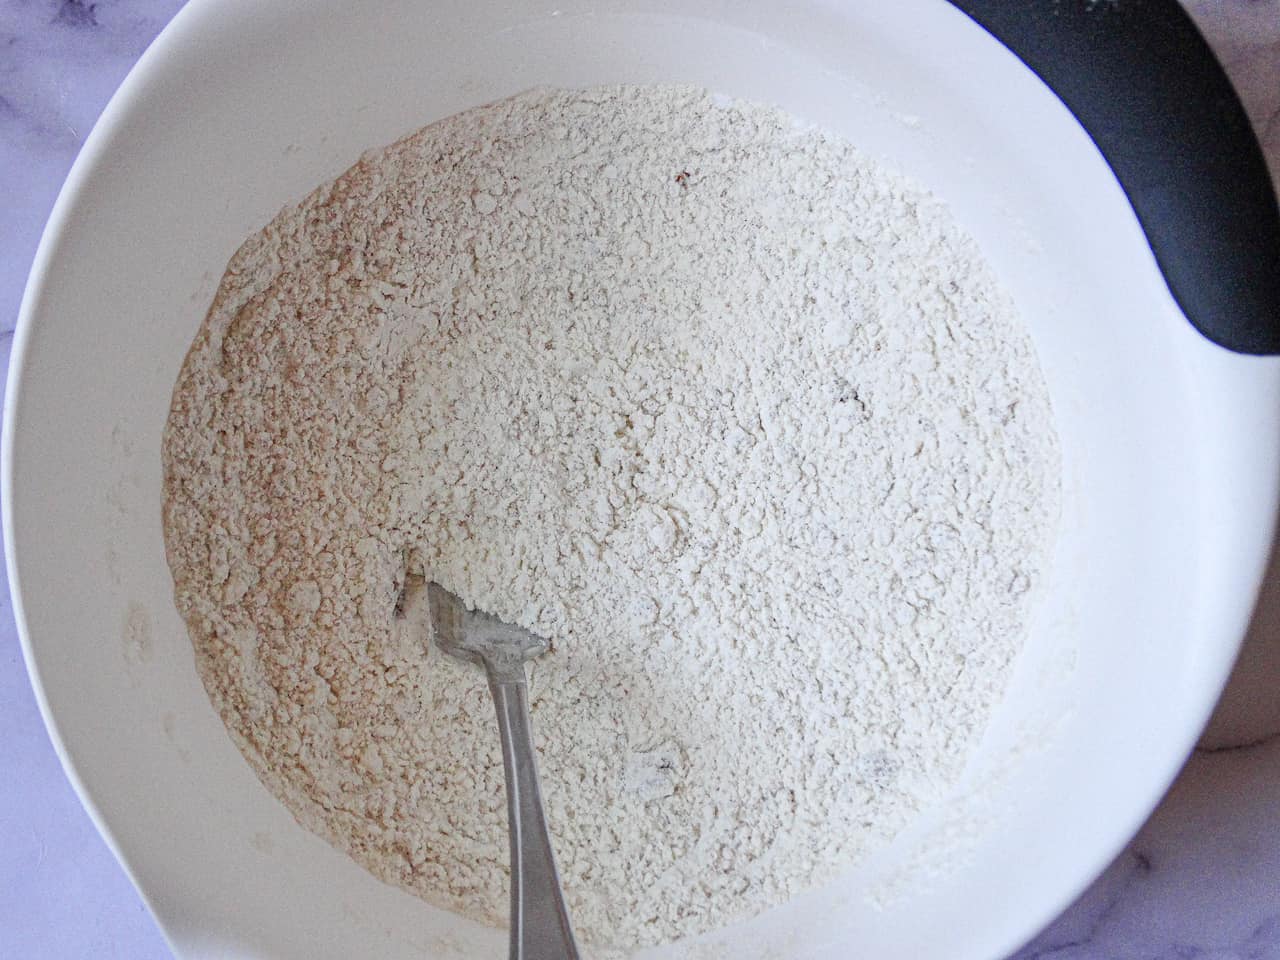 muffin dry ingredients in a mixing bowl